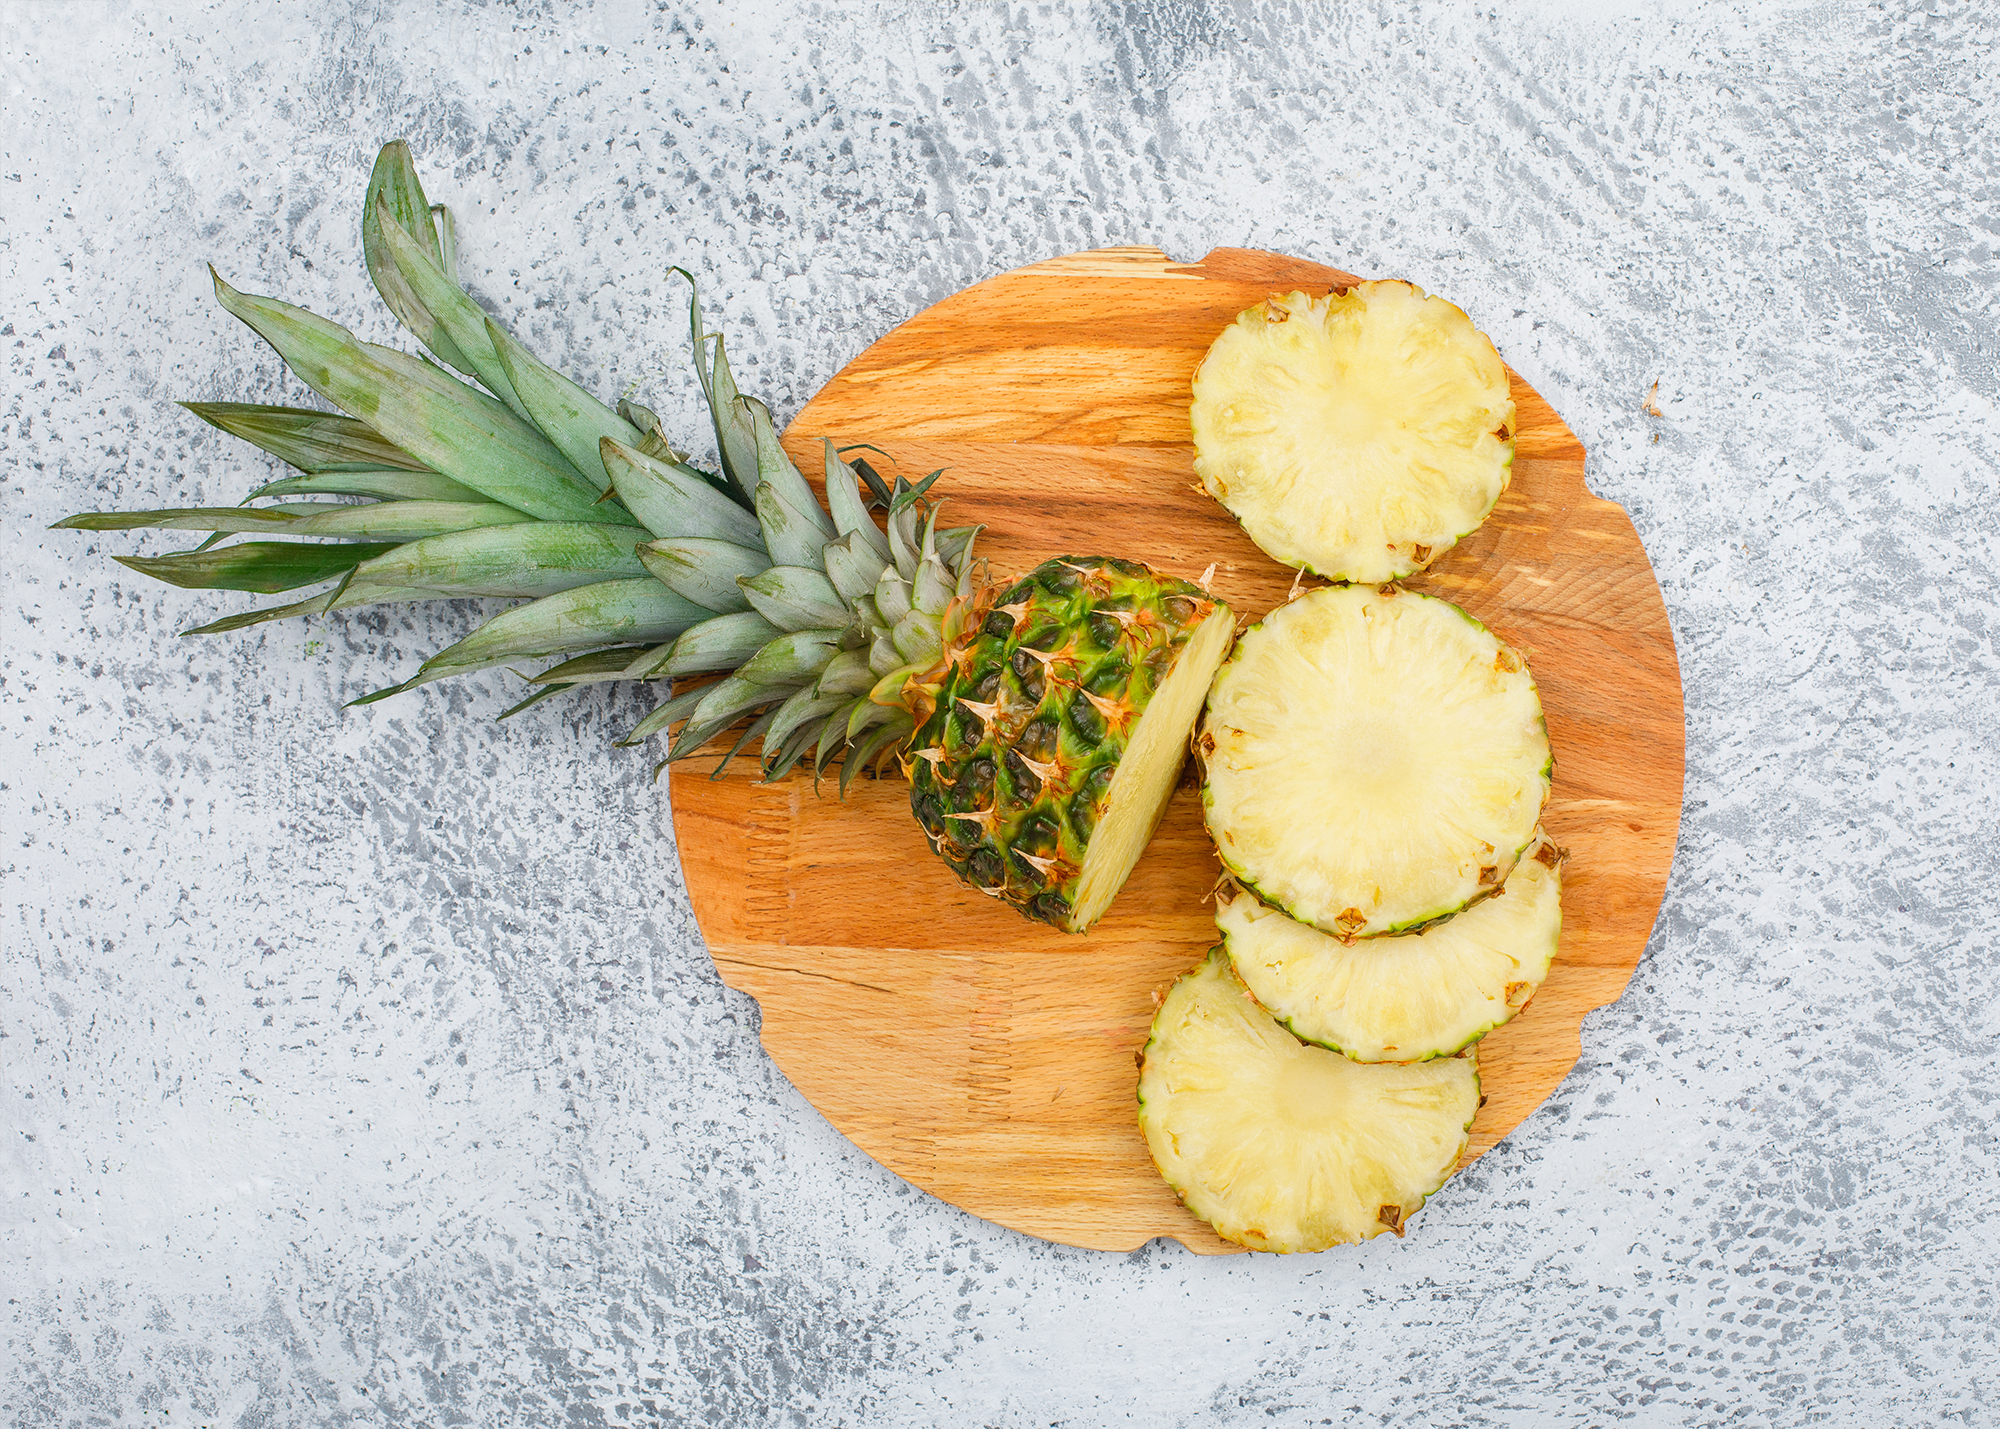 Juicy Delights: A Step-by-Step Guide to Cutting a Pineapple